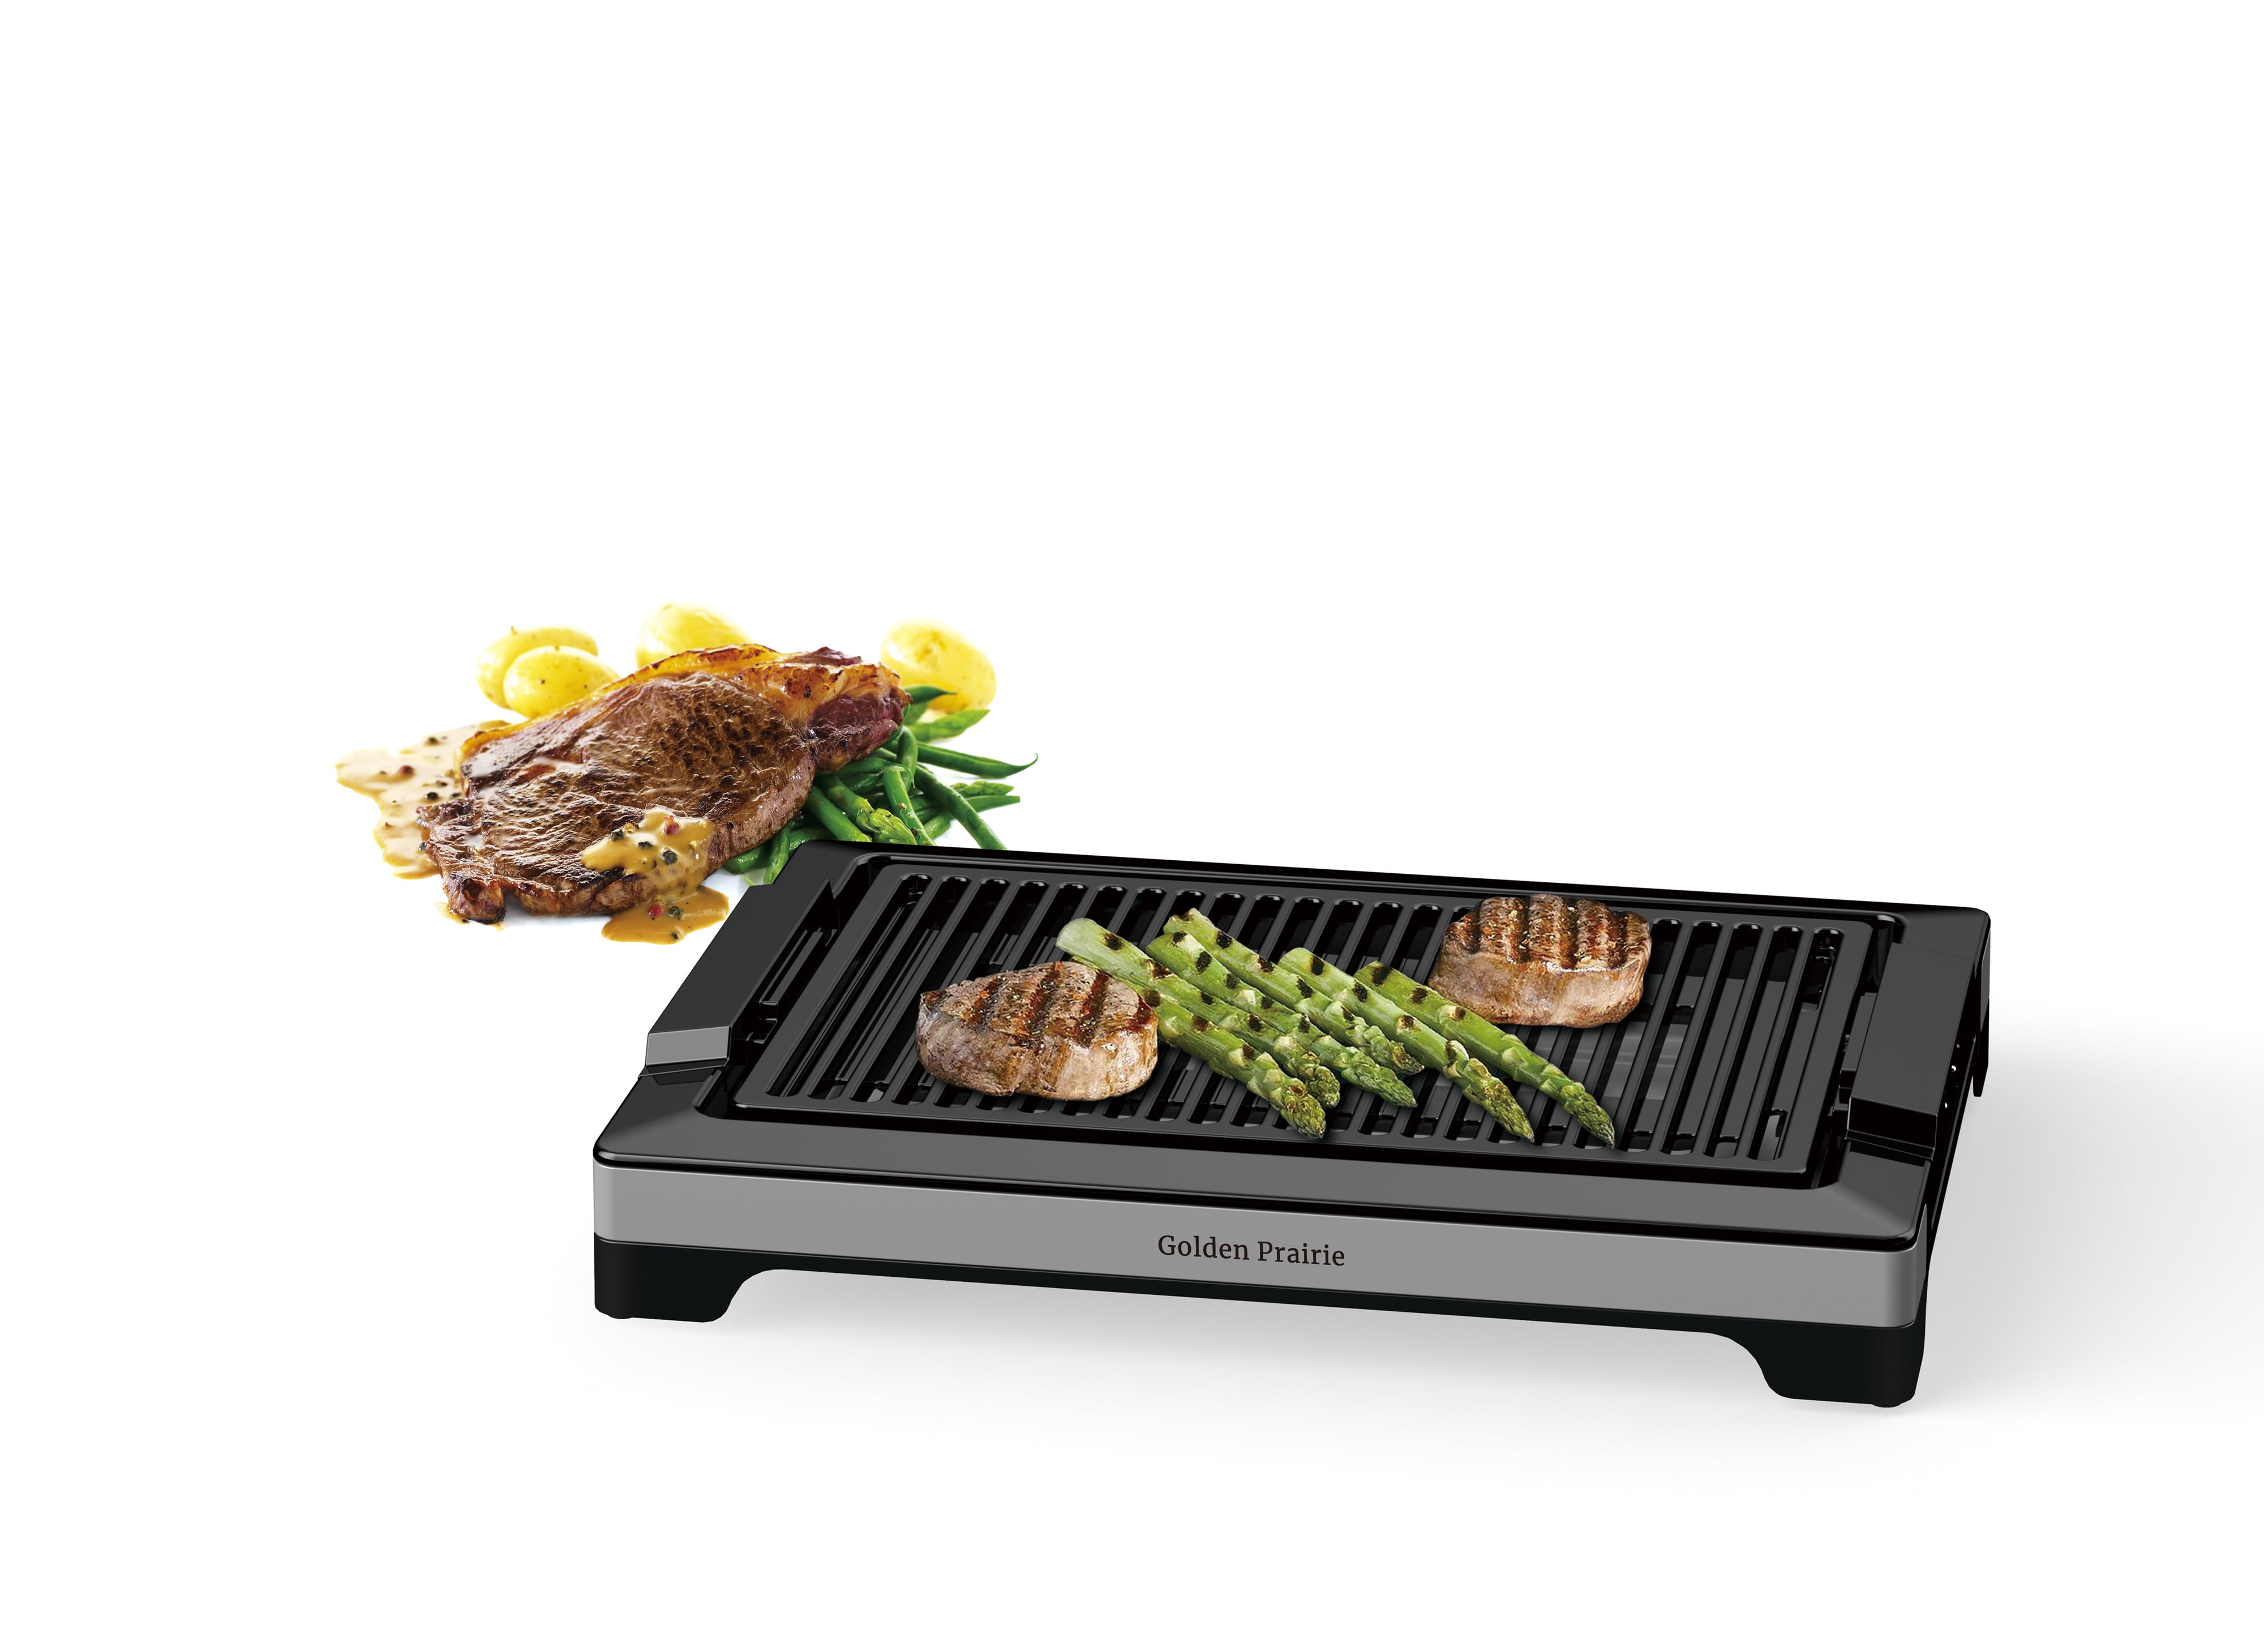 Electric Smokeless Indoor Grill, 1600W Fast Heat Up BBQ Grill, Nonstick Cooking Surface, 5 Levels Adjustable Temperature, Dishwasher Safe Removable